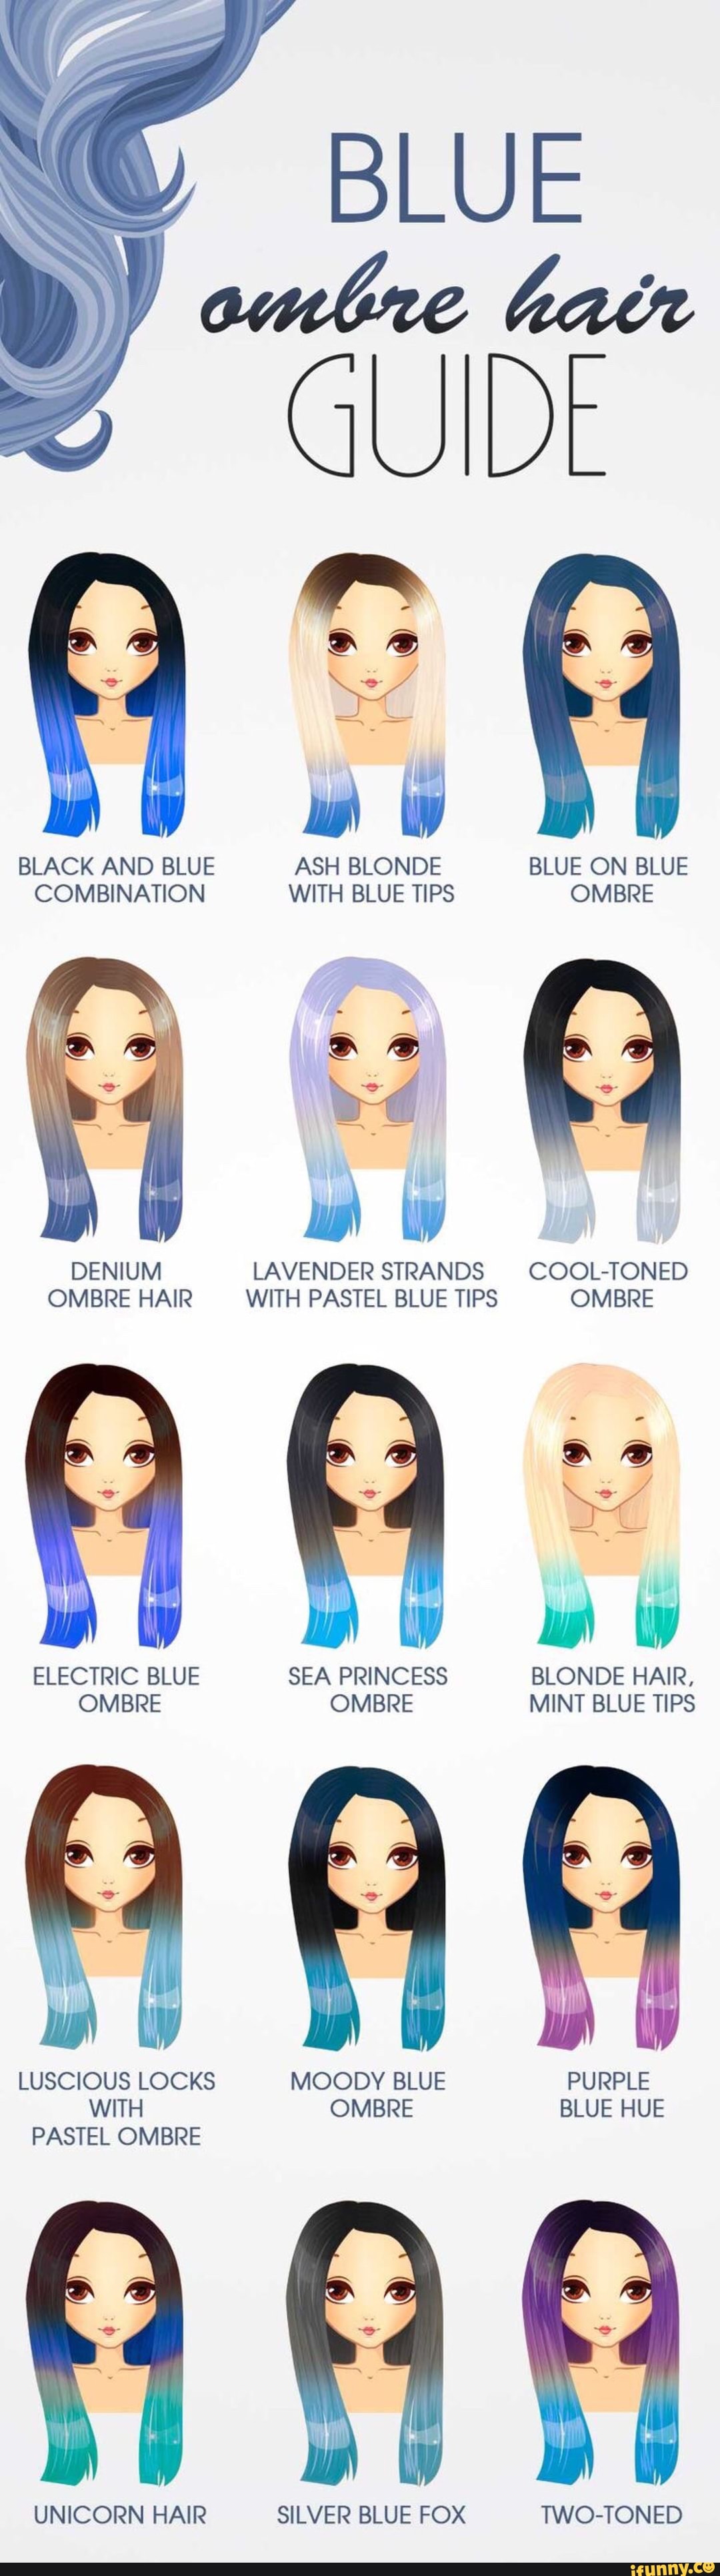 Black And Blue Ash Blonde Blue On Blue Combination With Blue Tips Ombre Im W Denium Lavender Strands Cool Toned Ombre Hair With Pastel Blue Tips Ombre Ifunny